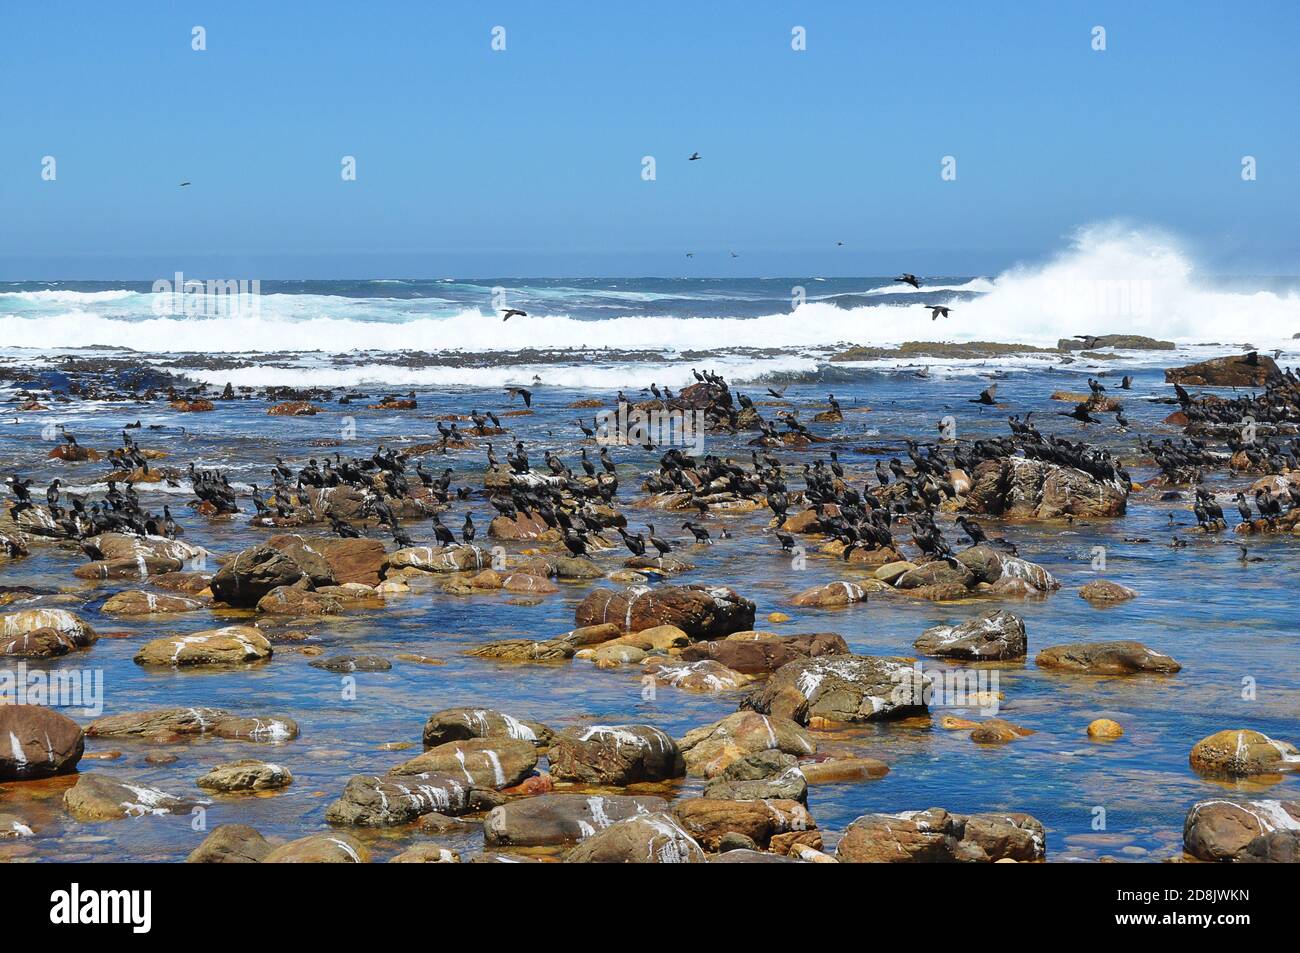 Cormorant colony on a rocky beach at Cape of Good Hope, South Africa Stock Photo